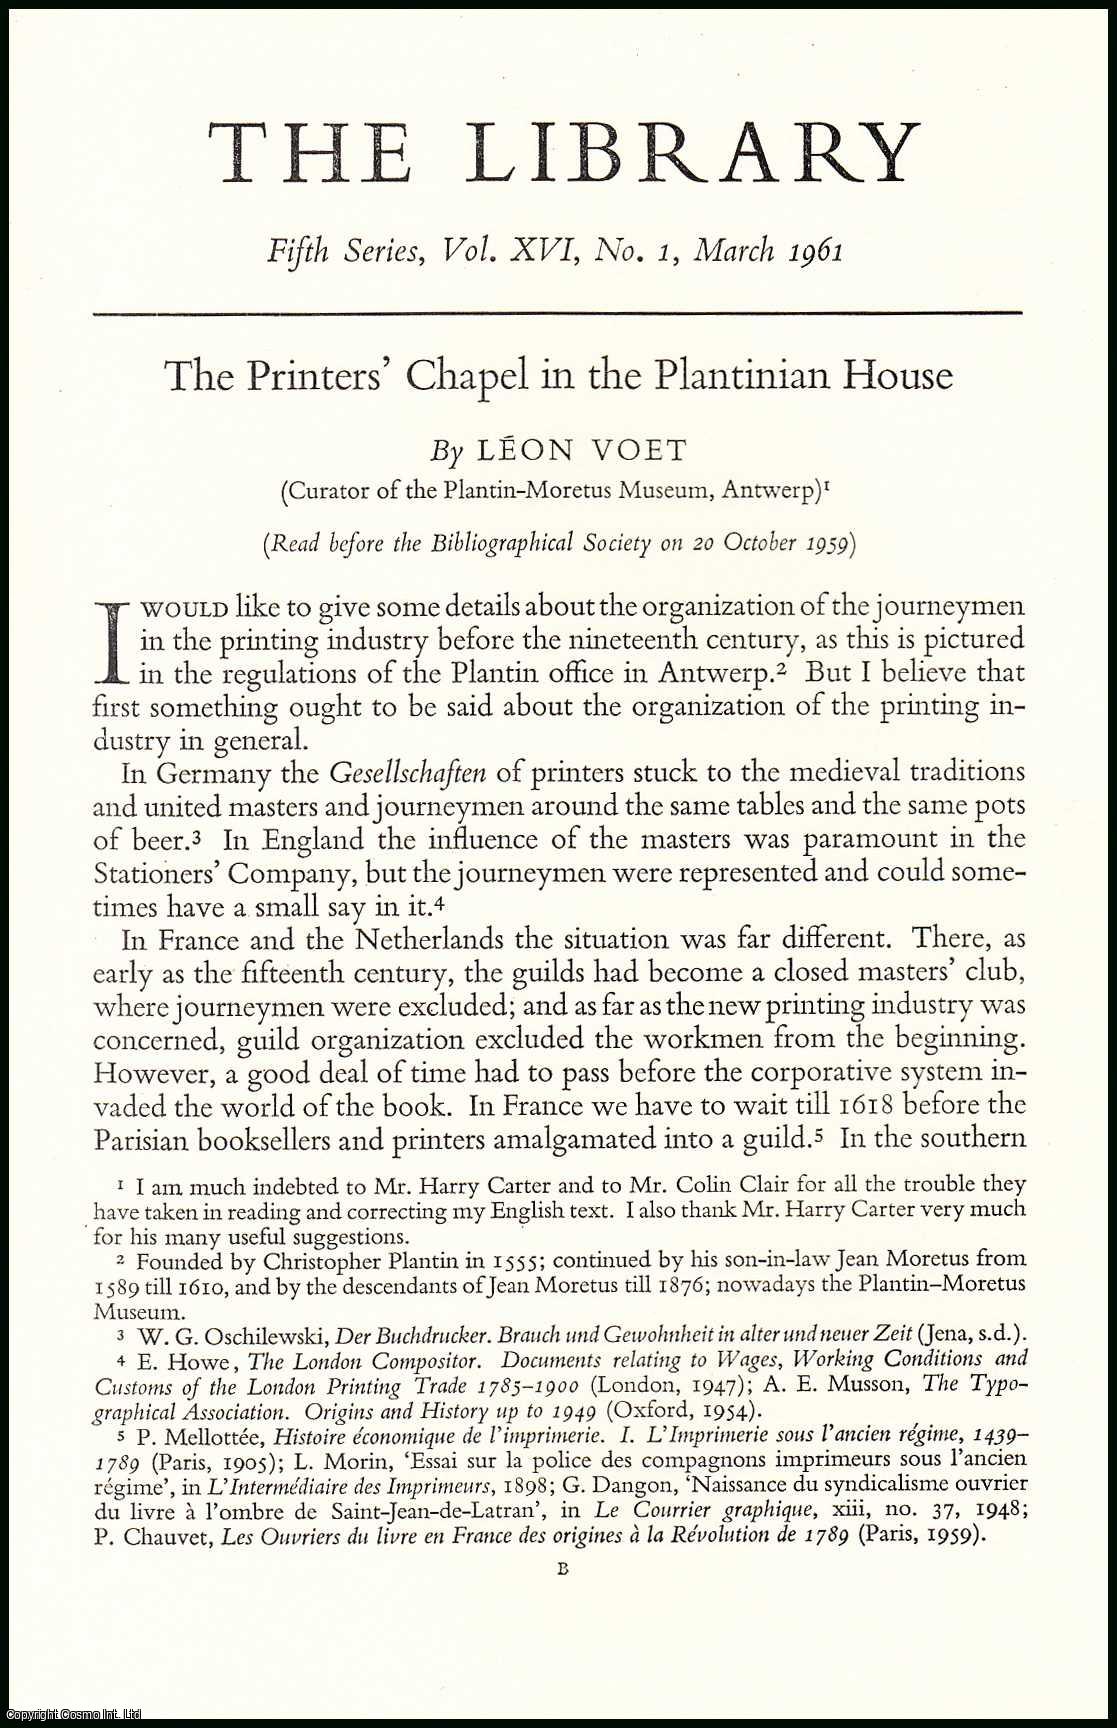 Leon Voet, Curator of the Plantin-Moretus Museum, Antwerp. - The Printers Chapel in the Plantinian House, Antwerp. An uncommon original article from the Library, 1961.